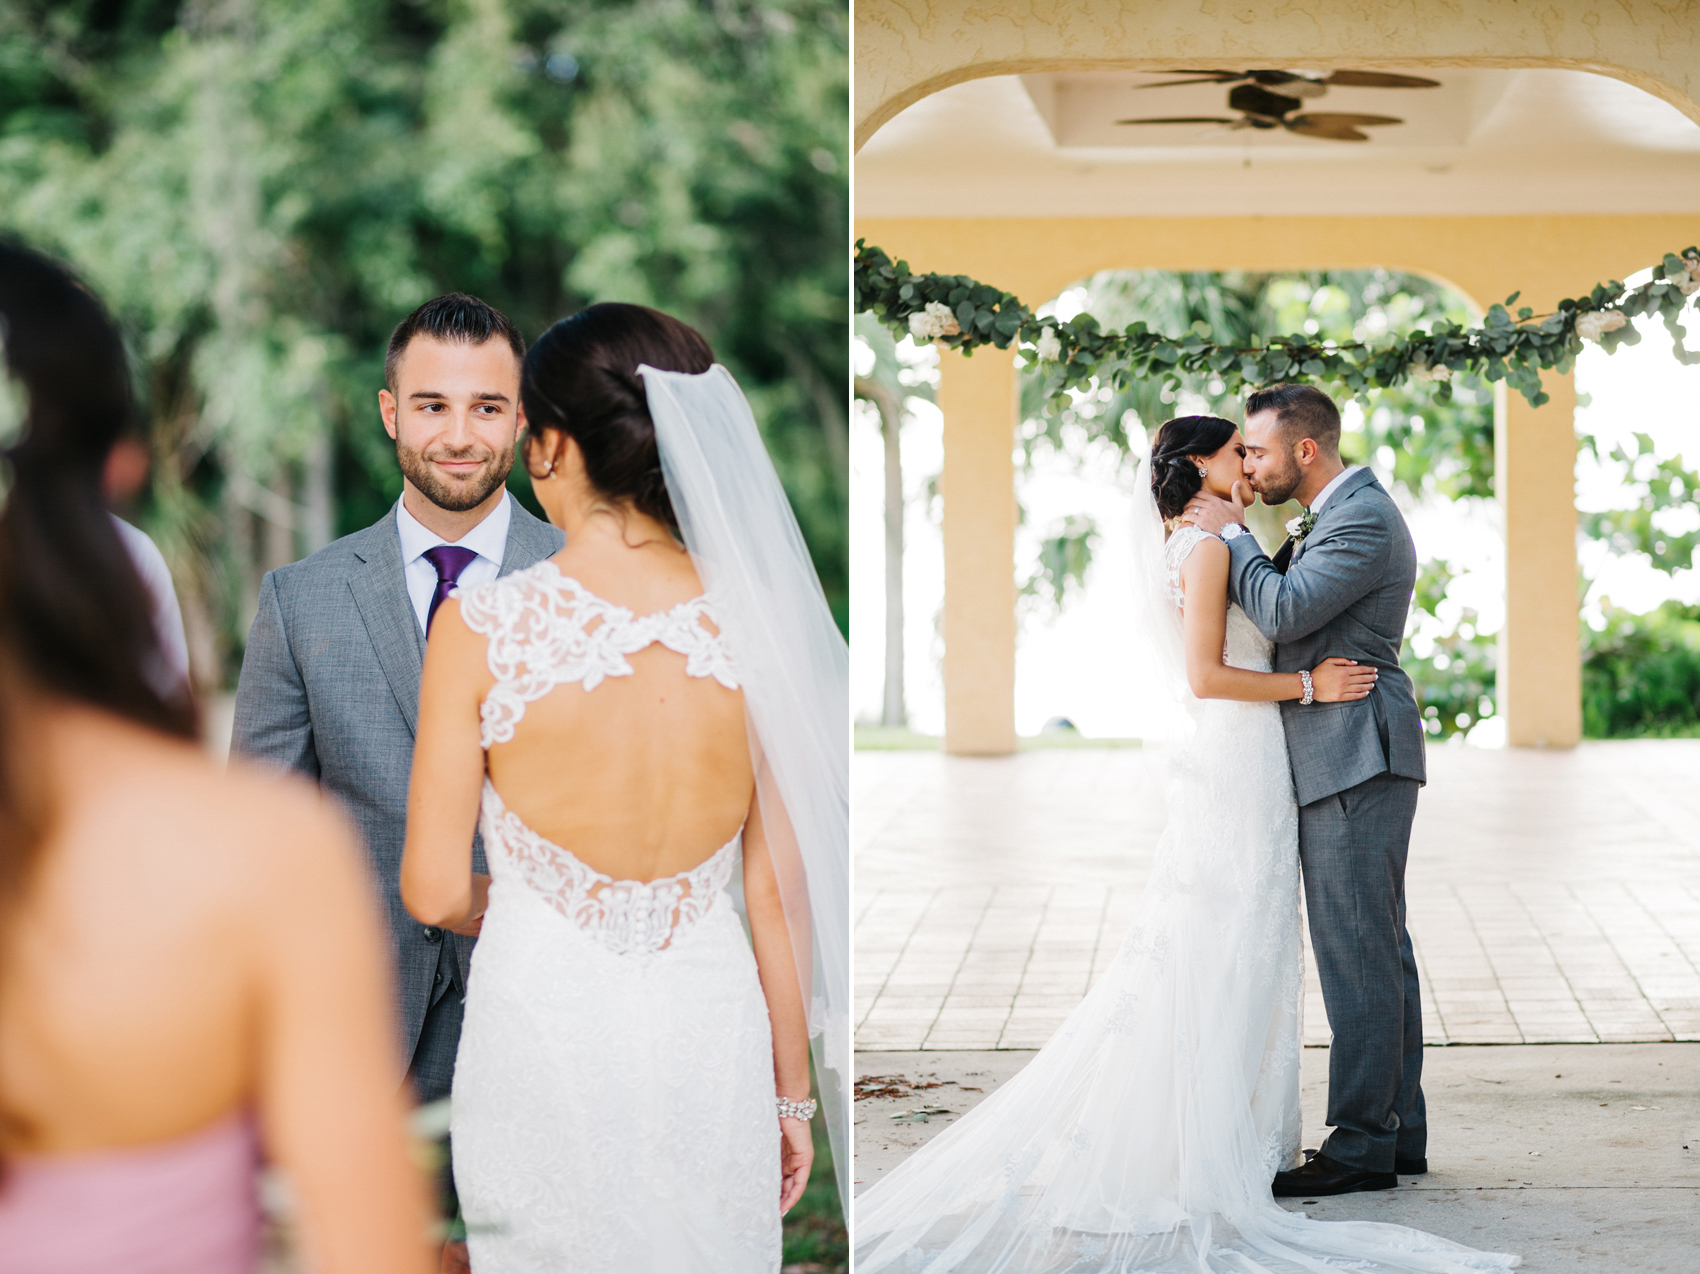 Exchanging vows and the first kiss under the greenery garland arch at the Powel Crosley Estate